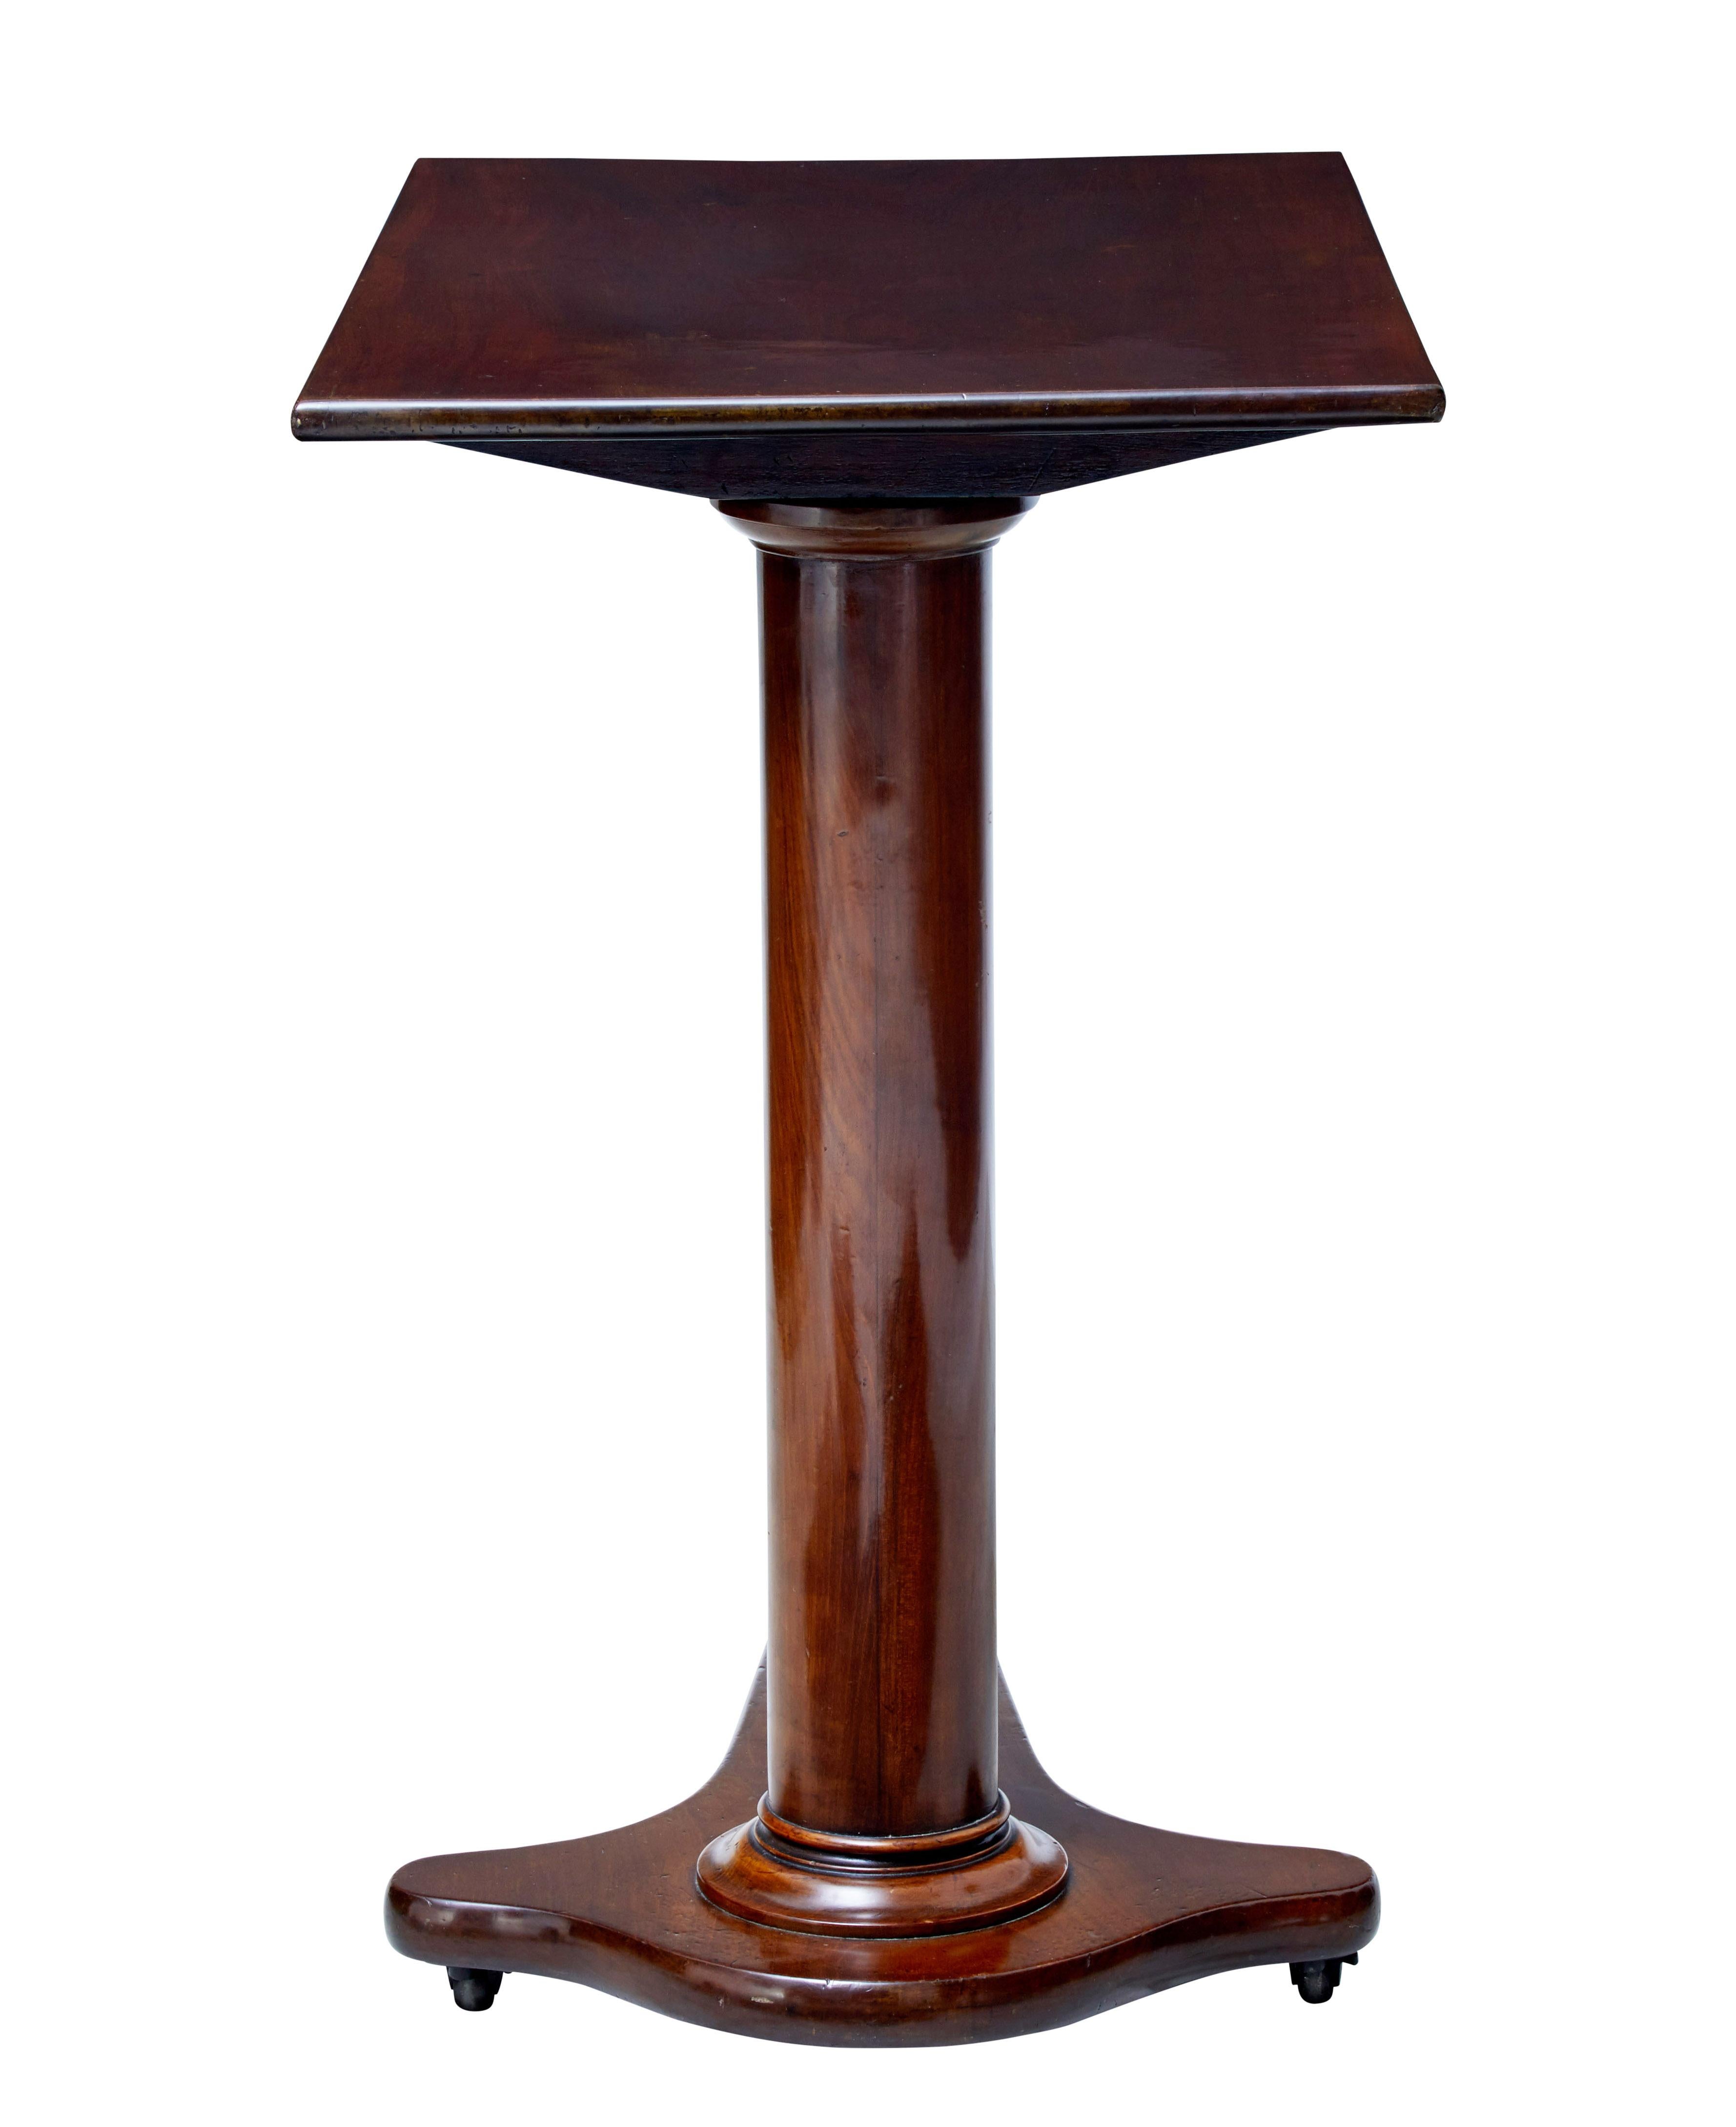 Fine quality William IV mahogany adjustable beside table.

Adjusts in height to 43 inches.

Beautiful timber used with a rich color and patina. Standing on a cylinder stem and shaped base. Raised on three original castors.